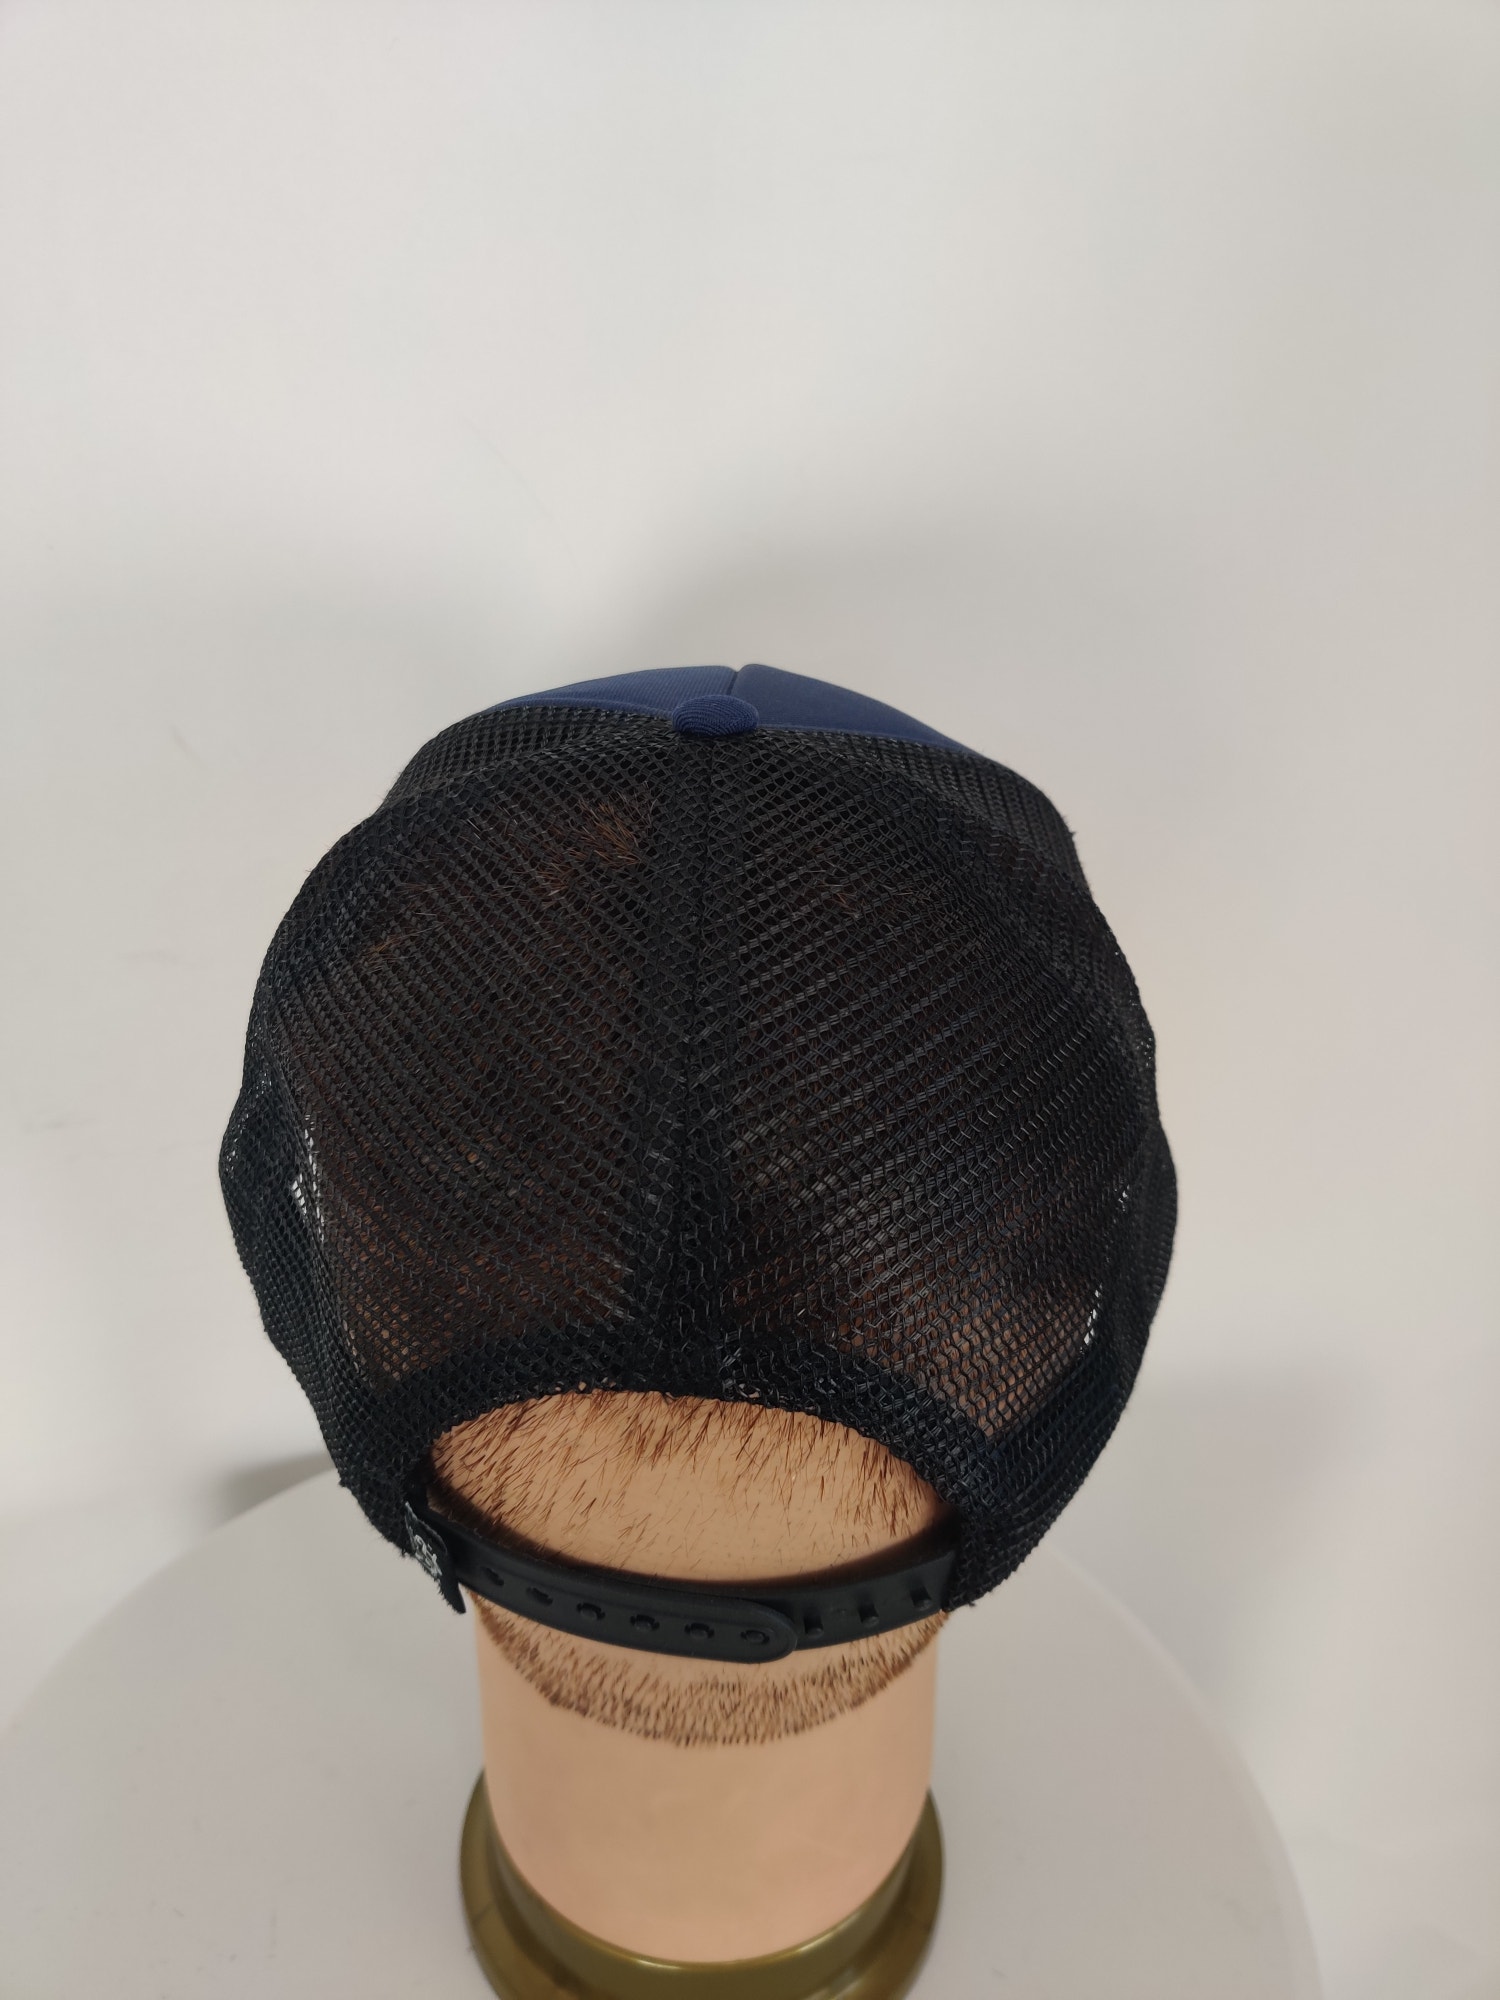 (V) ORIGINAL LRG Unisex hat hiking casual mesh back navy One size  - Picture 8 of 11